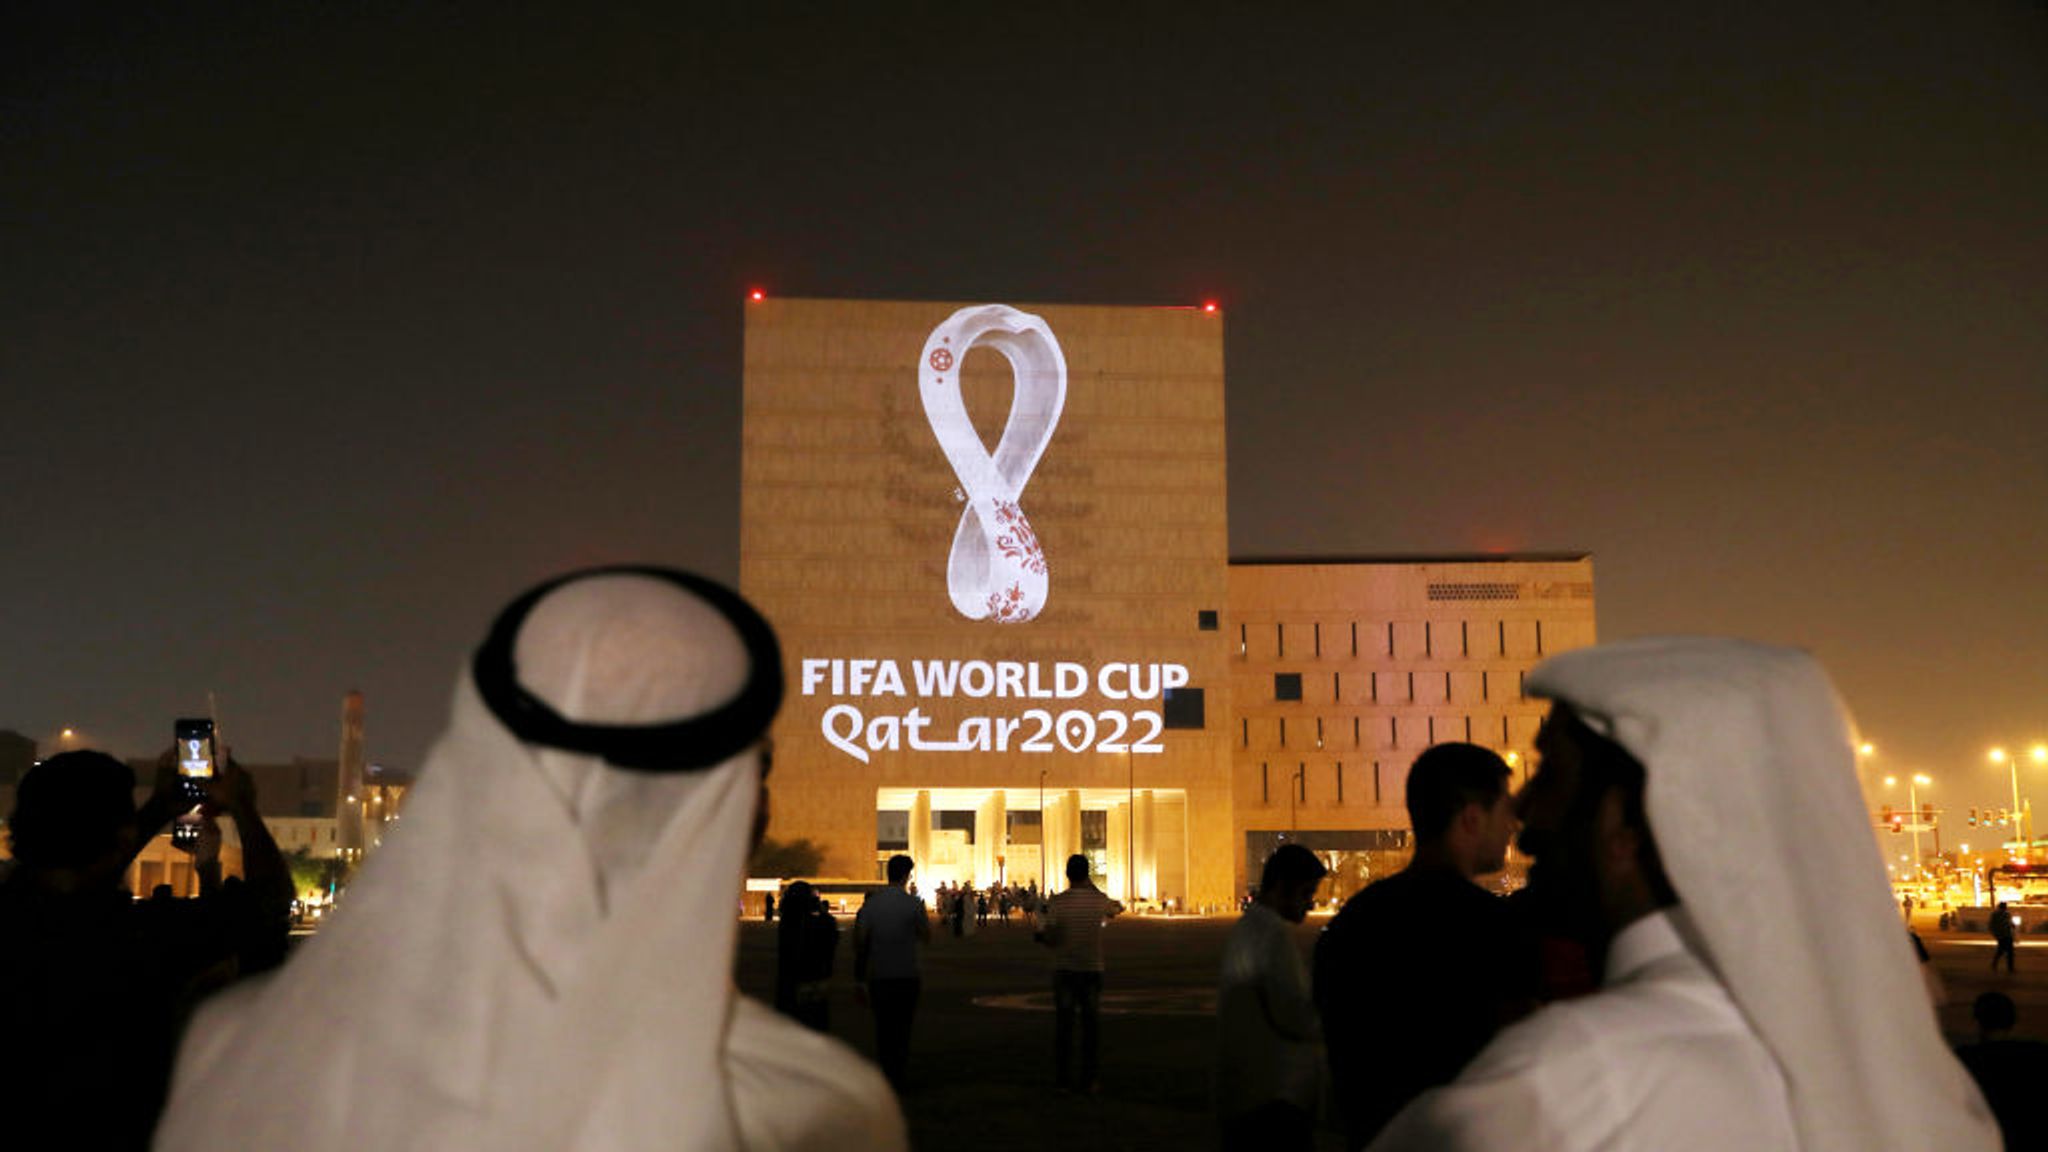 FIFA World Cup logo unveiled around the World in a Grand Ceremony